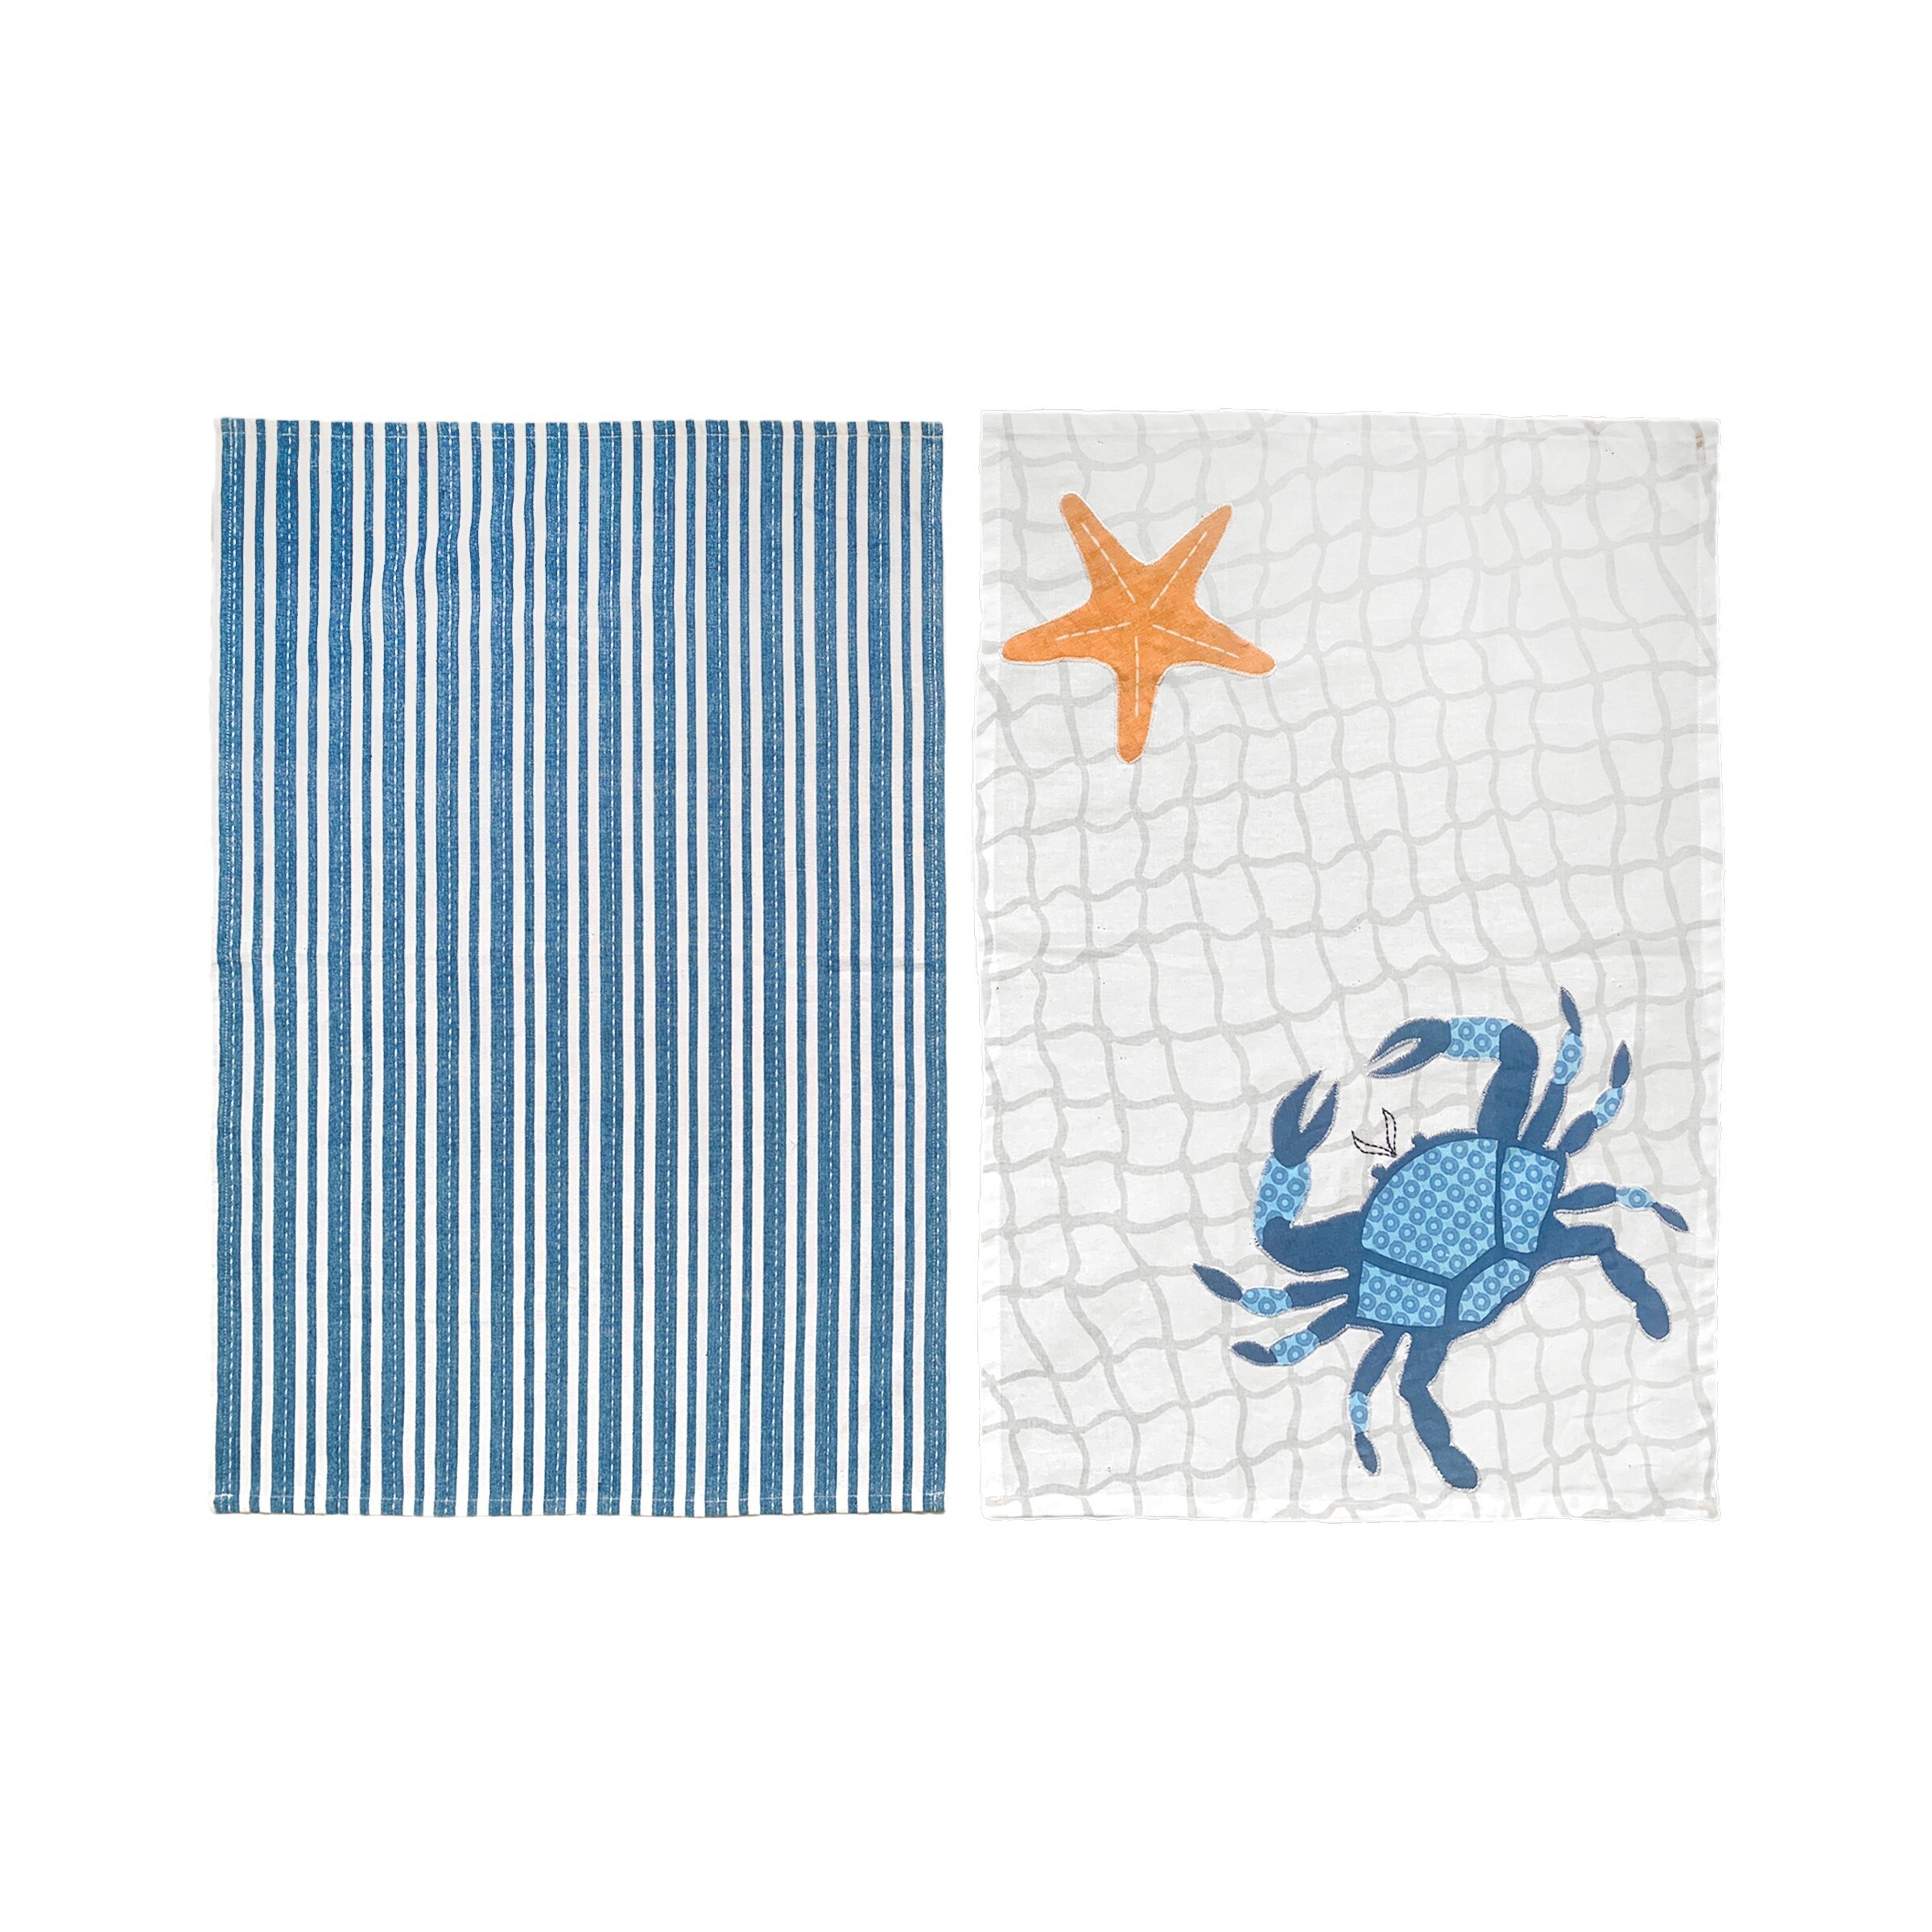 https://ak1.ostkcdn.com/images/products/is/images/direct/c0e59769fd0f7b772c9be9de0f0bcbca2f6d3d3b/Crab-Stripe-Printed-Kitchen-Towel-Set-of-2.jpg